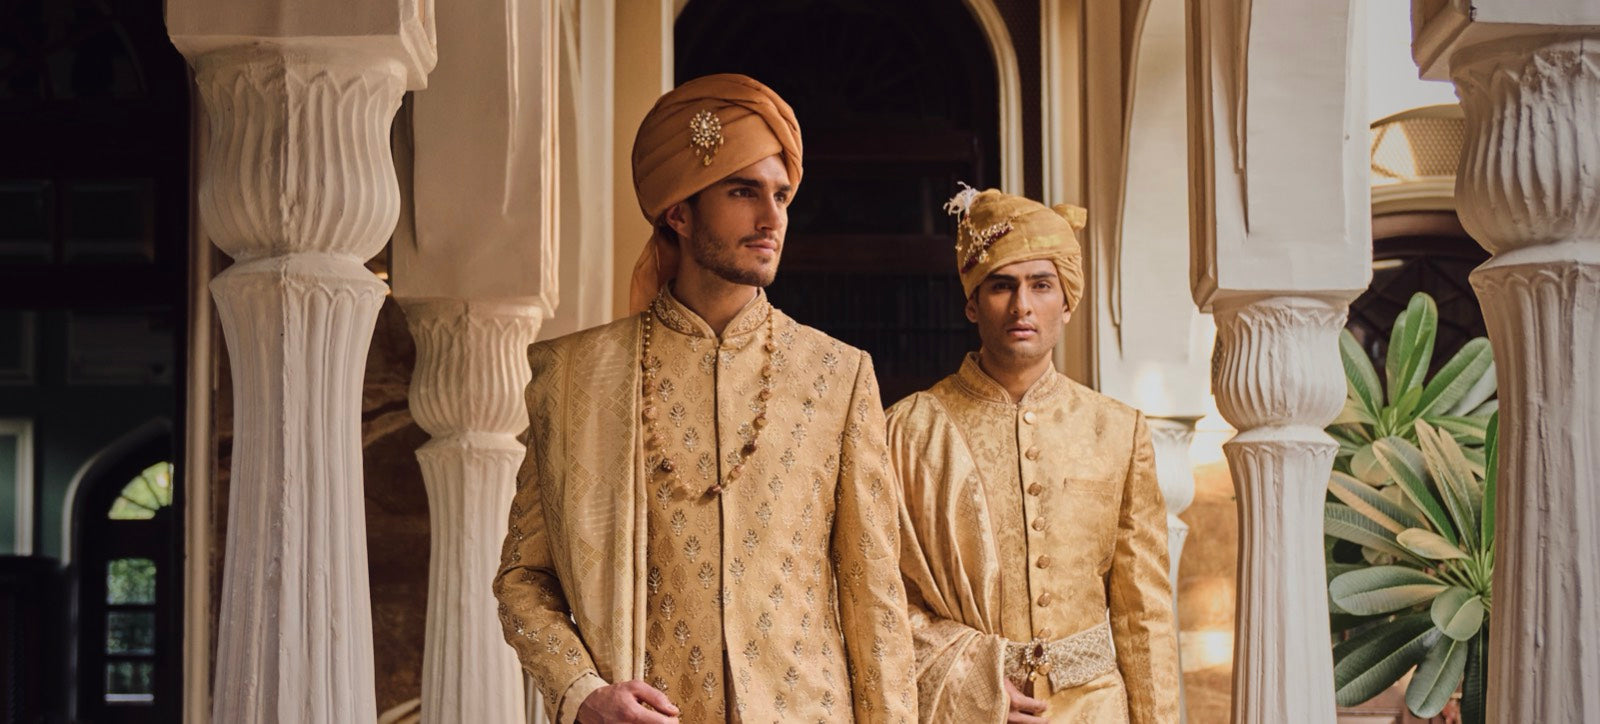 The Tasva Tribe: Meet the grooms shining in our exquisite collection